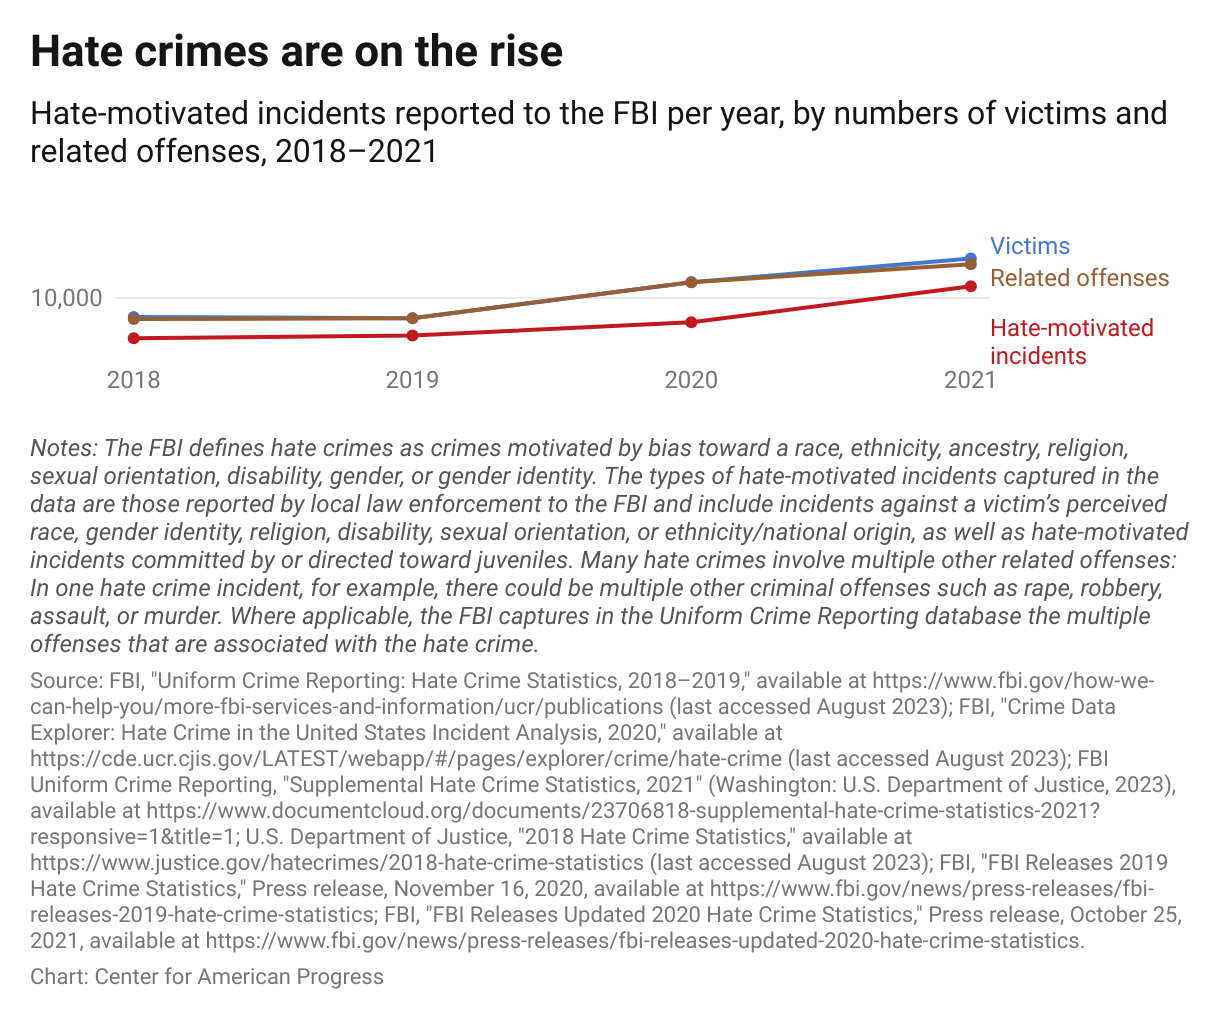 Chart showing the number of hate-motivated incidents reported to the FBI from 2018 to 2021, by numbers of victims and related offenses, with hate crimes rising for four consecutive years.